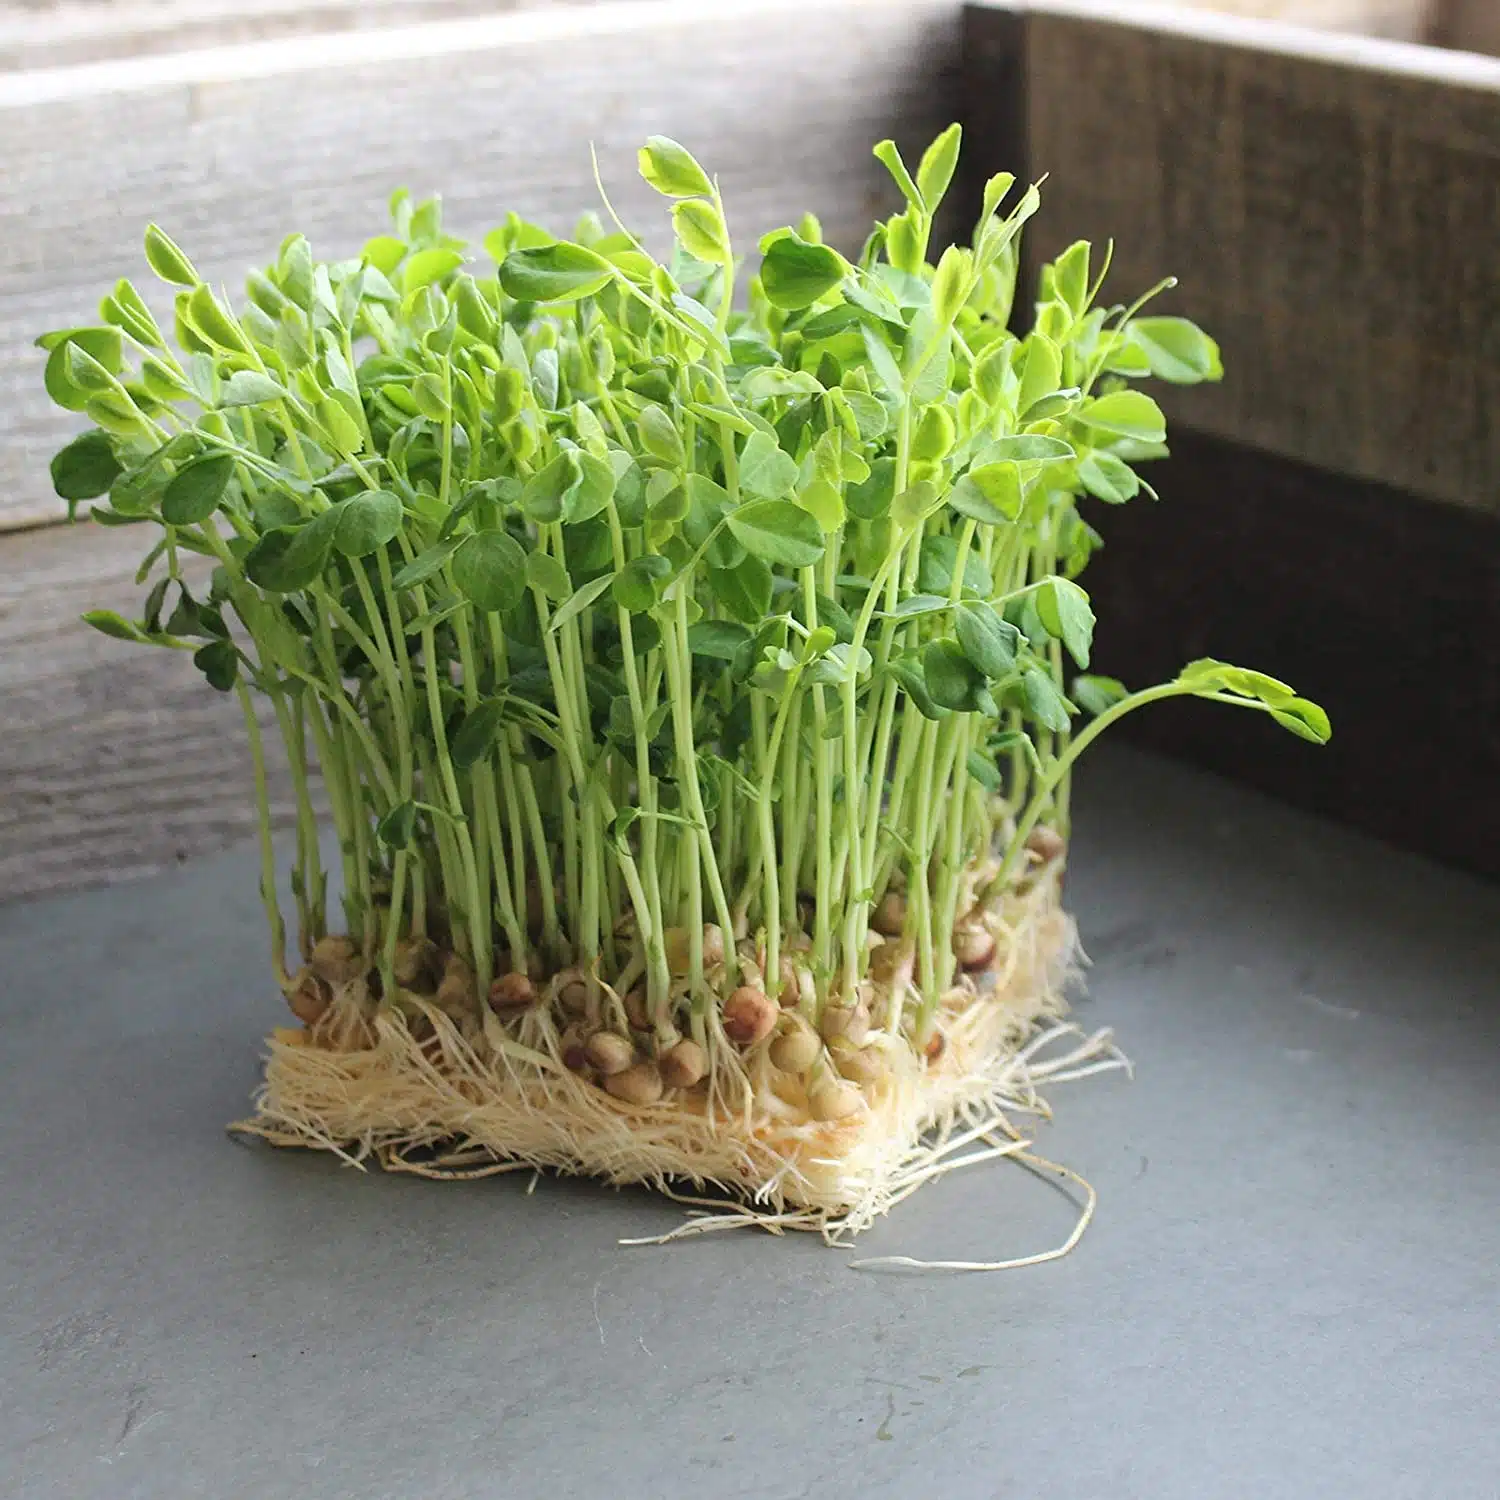 pea shoots, grow your own easily